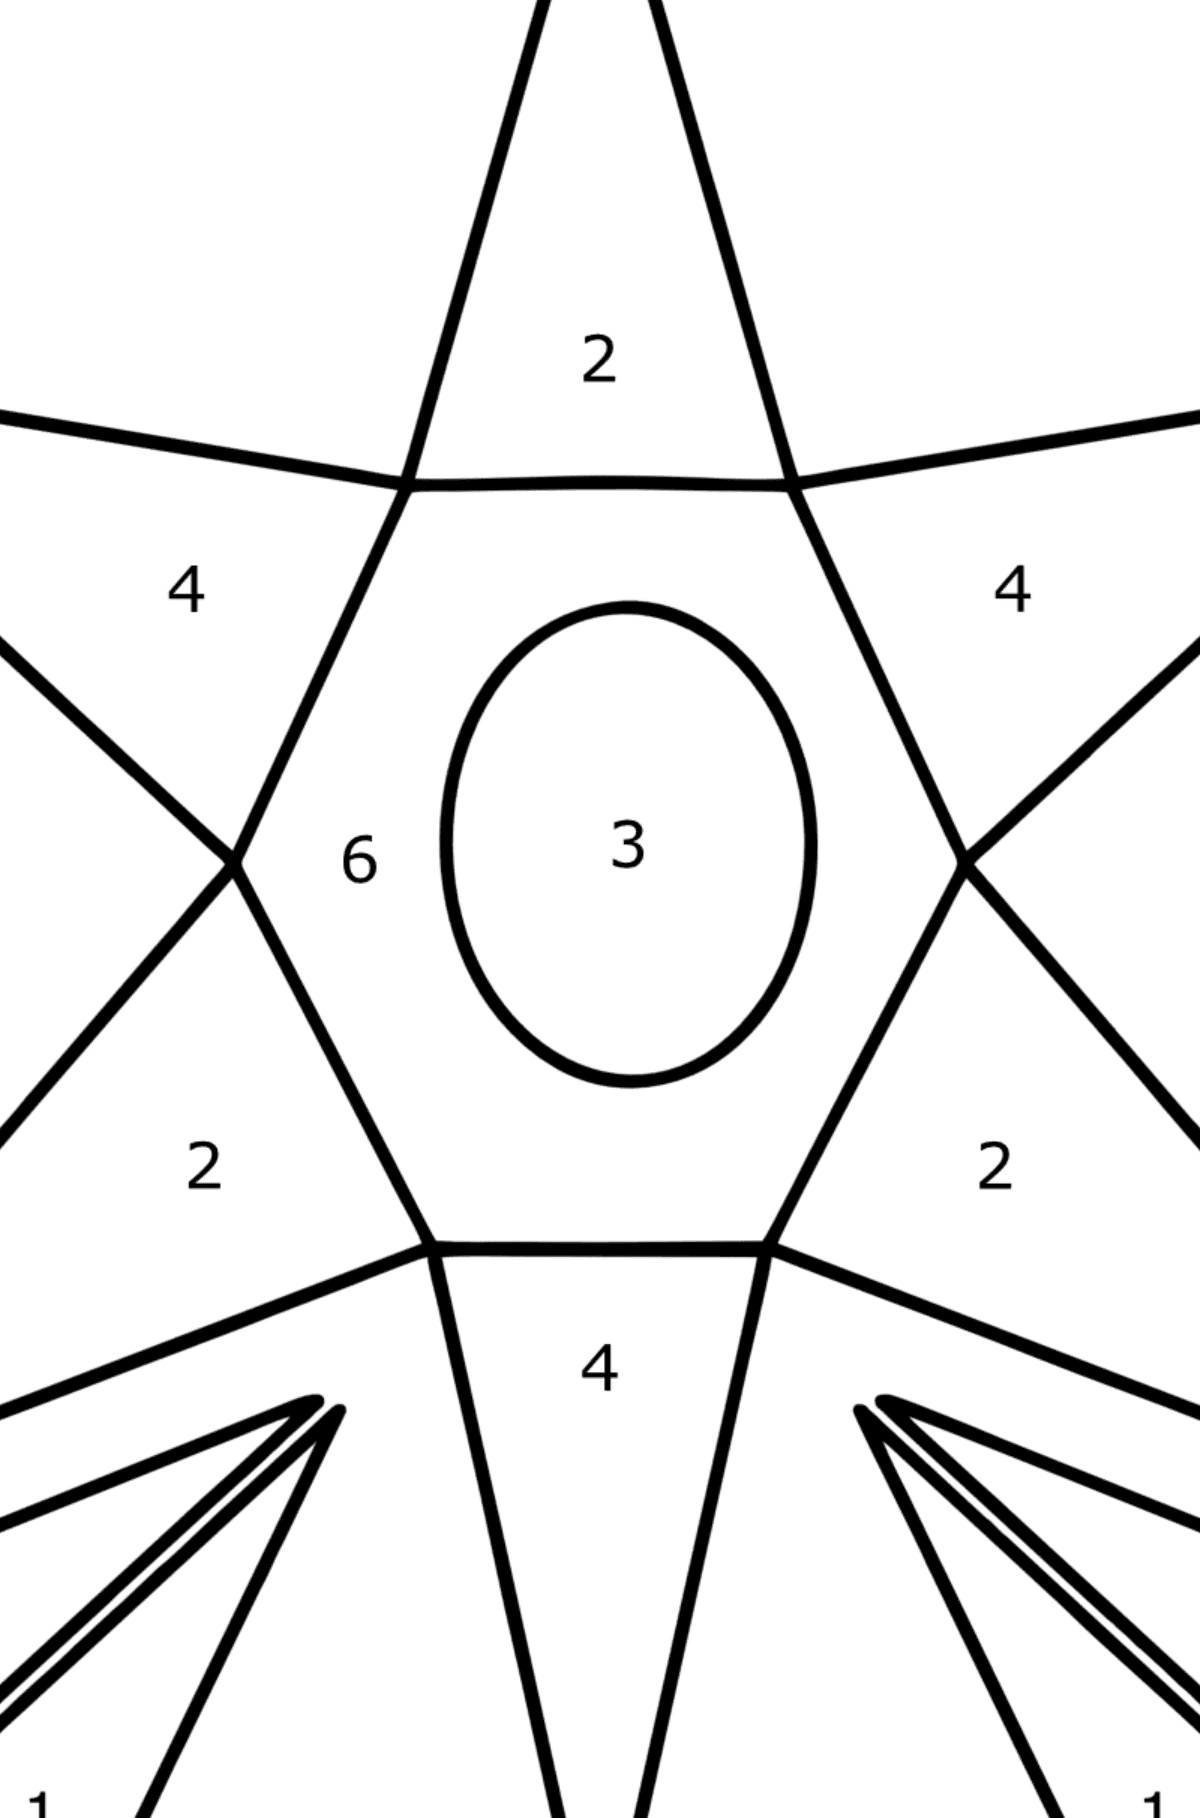 Coloring page - aster from geometric shapes - Coloring by Numbers for Kids